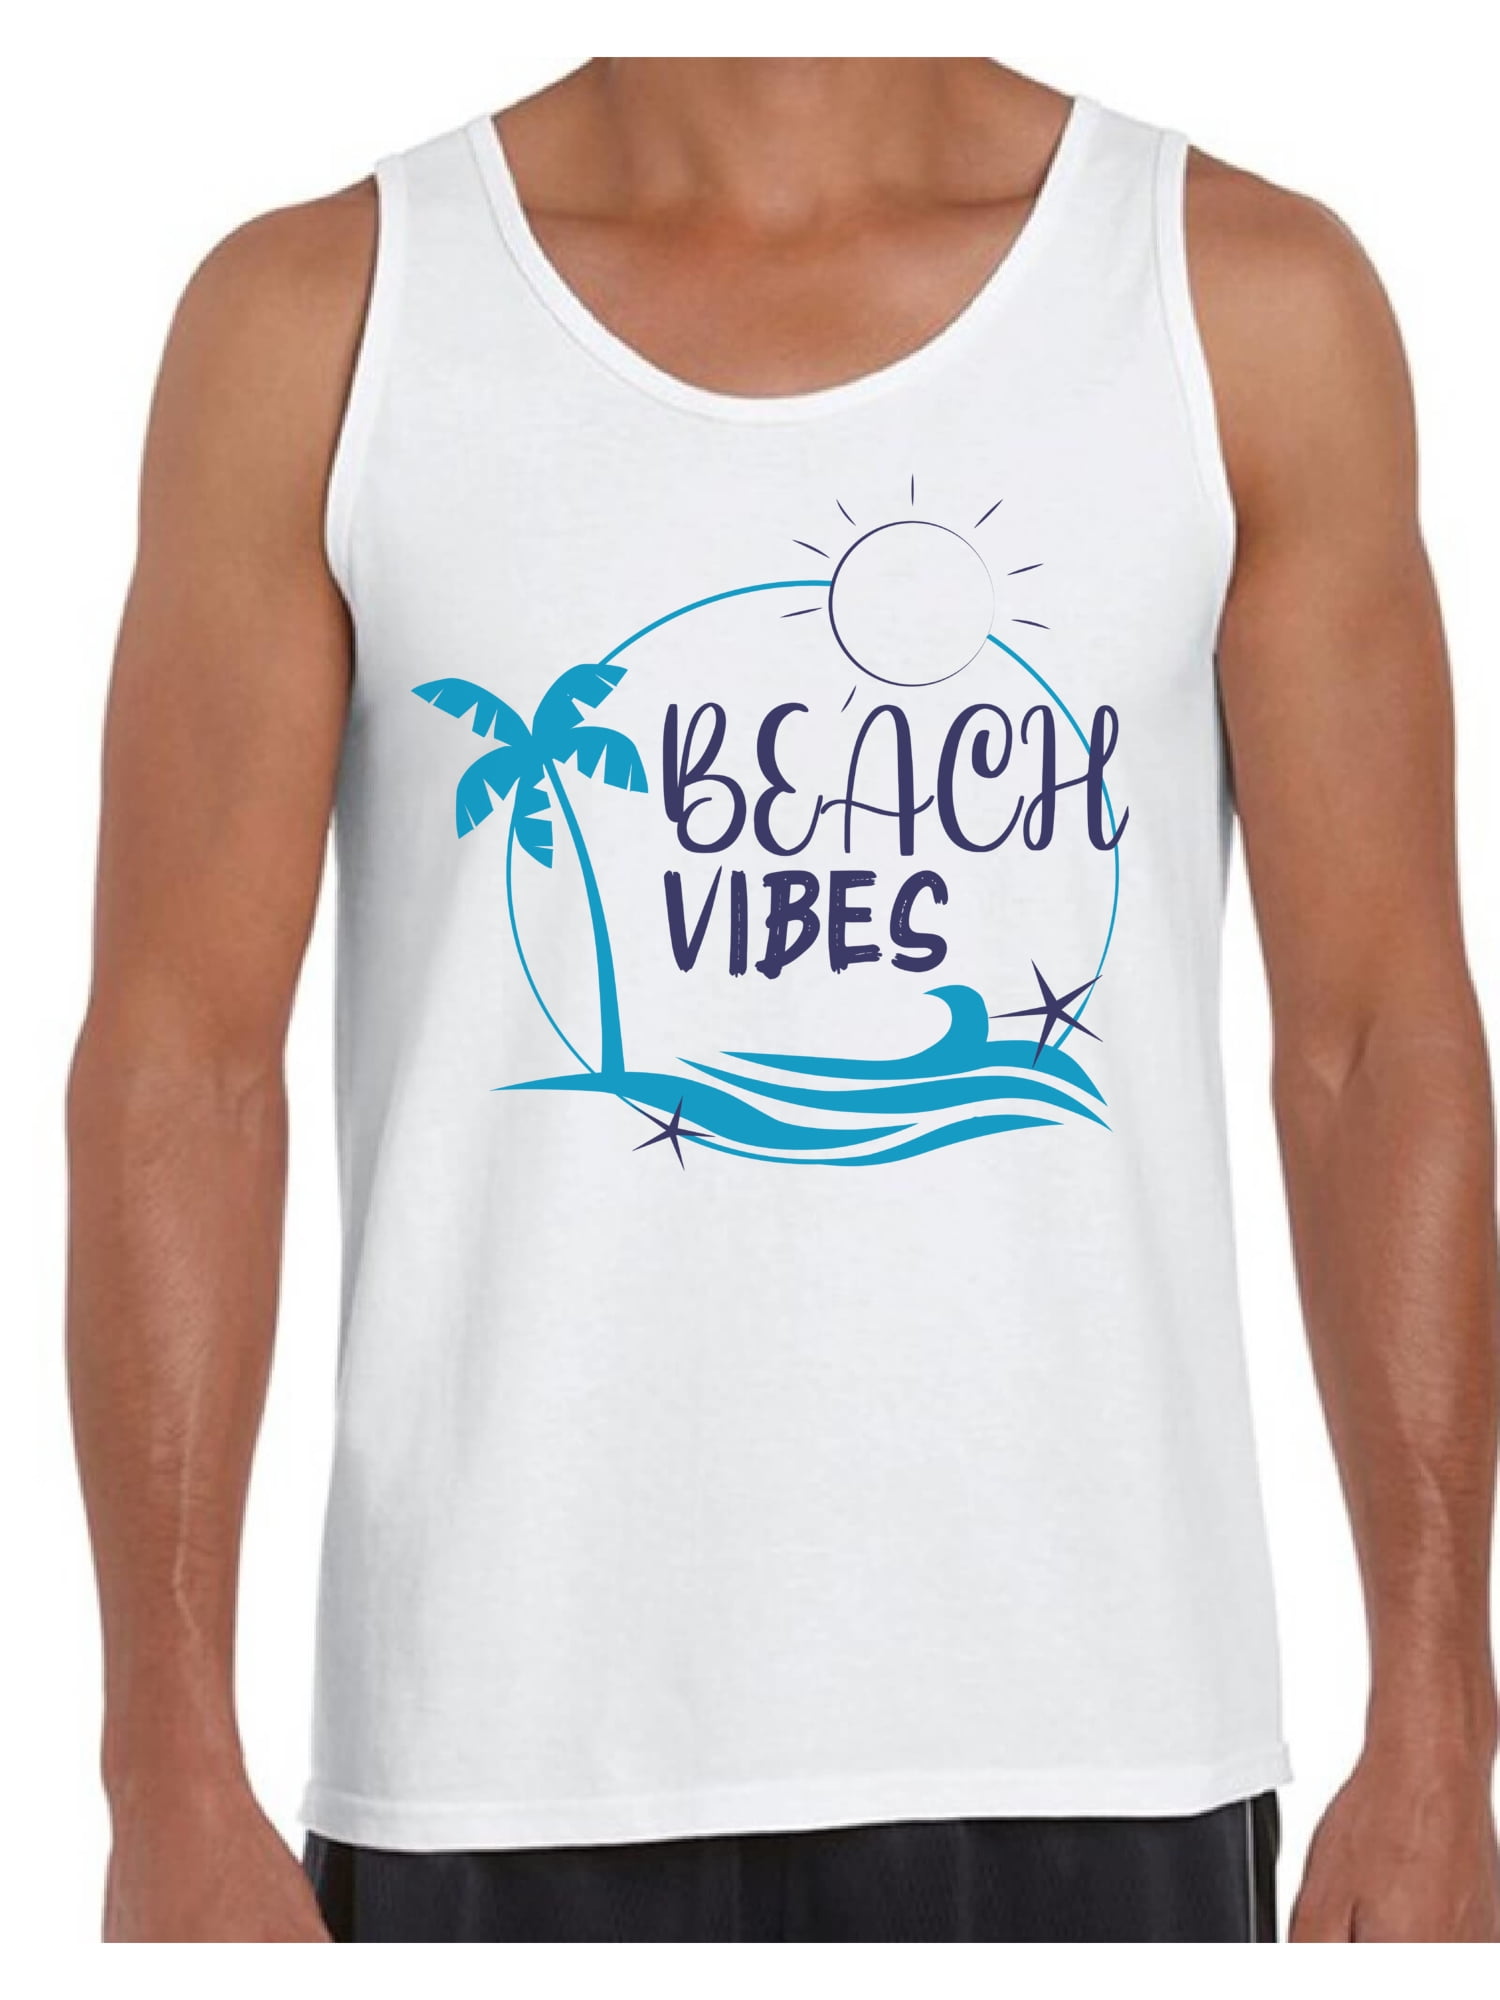 Vooruitzicht Wiskundig Ambacht Awkward Styles Summer Shirts Vacay Vibes Clothing Collection for Men Beach  Tank Top for Men Vacay Vibes Shirts Beach Vibes Clothes for Men Summer Tank  Top Beach Tshirt for Men Beach Gifts -